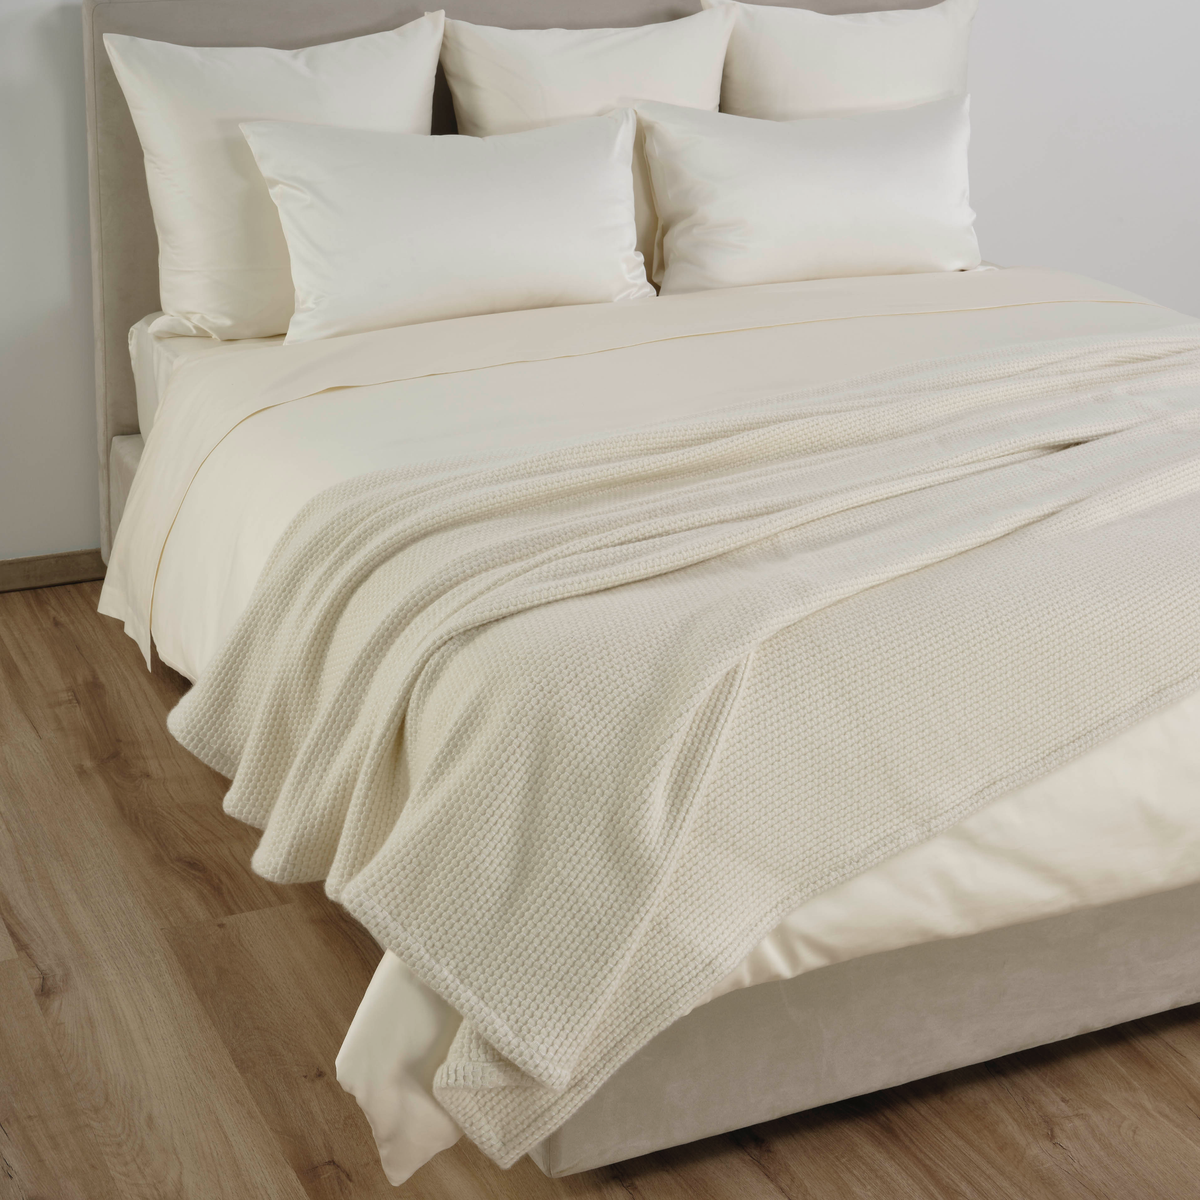 Celso de Lemos Himalaya Throw in Naturel Color on a Bed